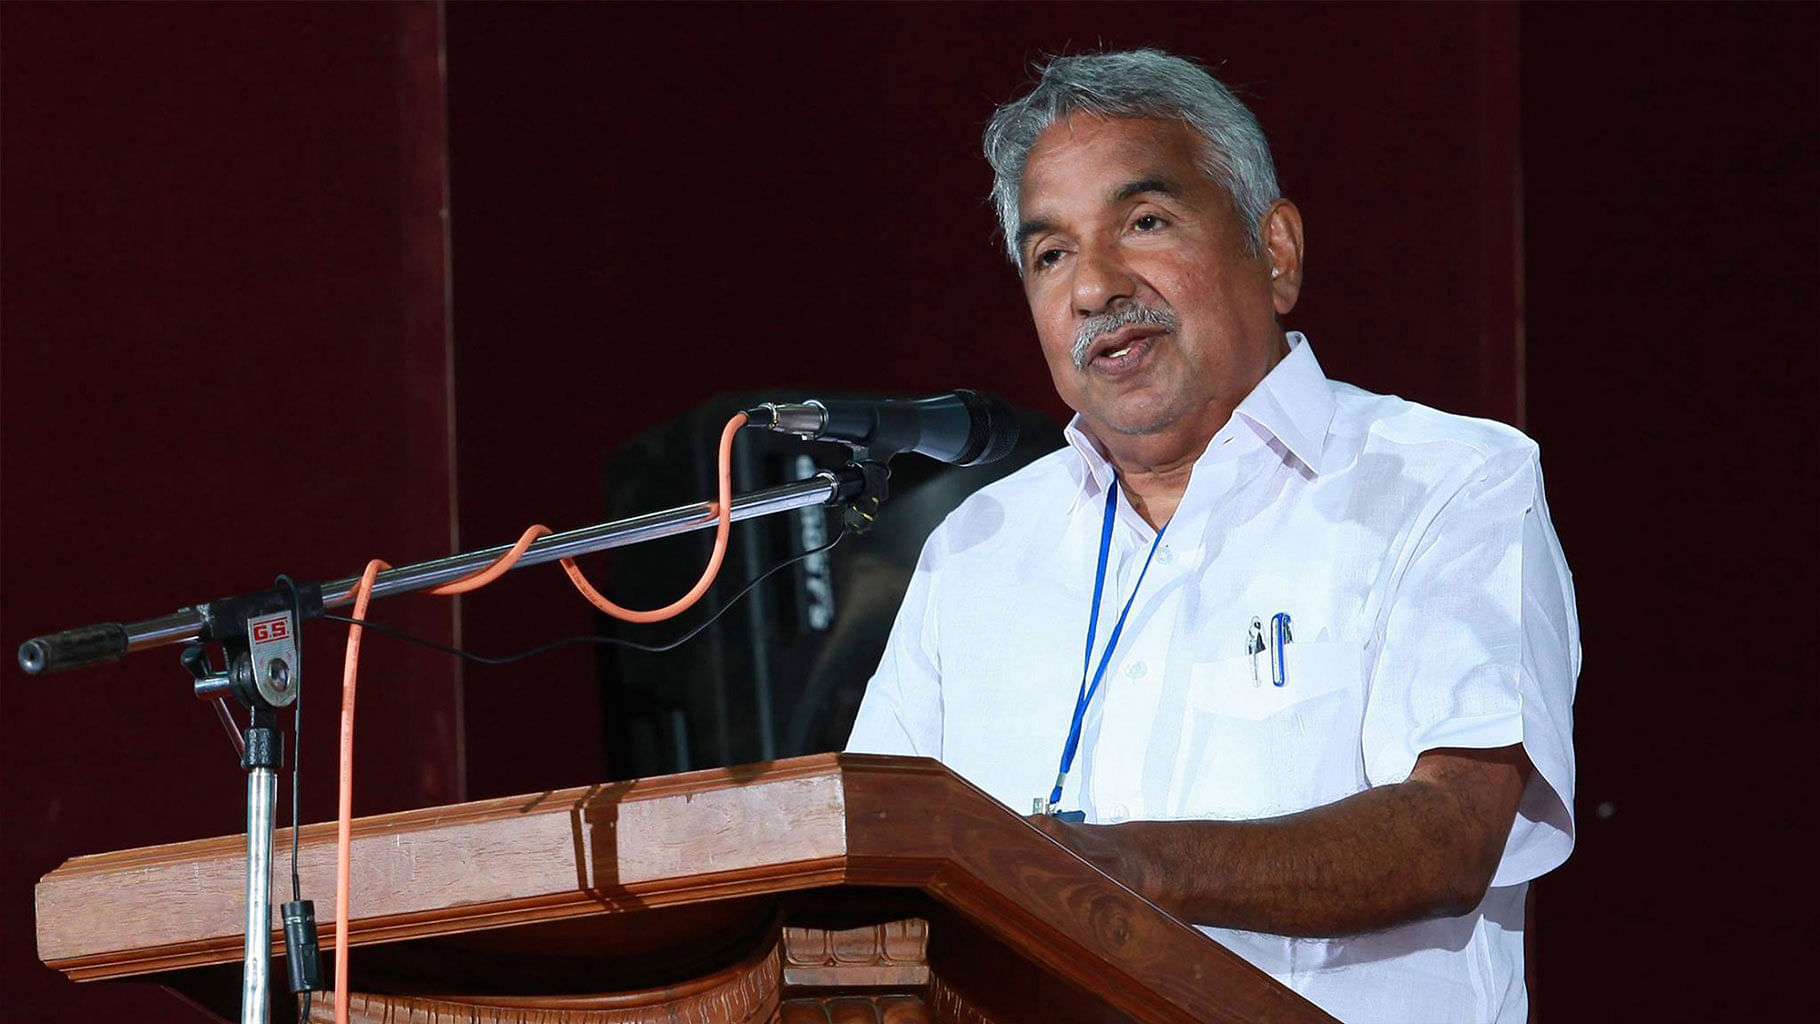 Kerala Chief Minister Oommen Chandy. (Photo courtesy: Facebook page/<a href="https://www.facebook.com/oommenchandy.official/?fref=ts">Oomen Chandy</a>)